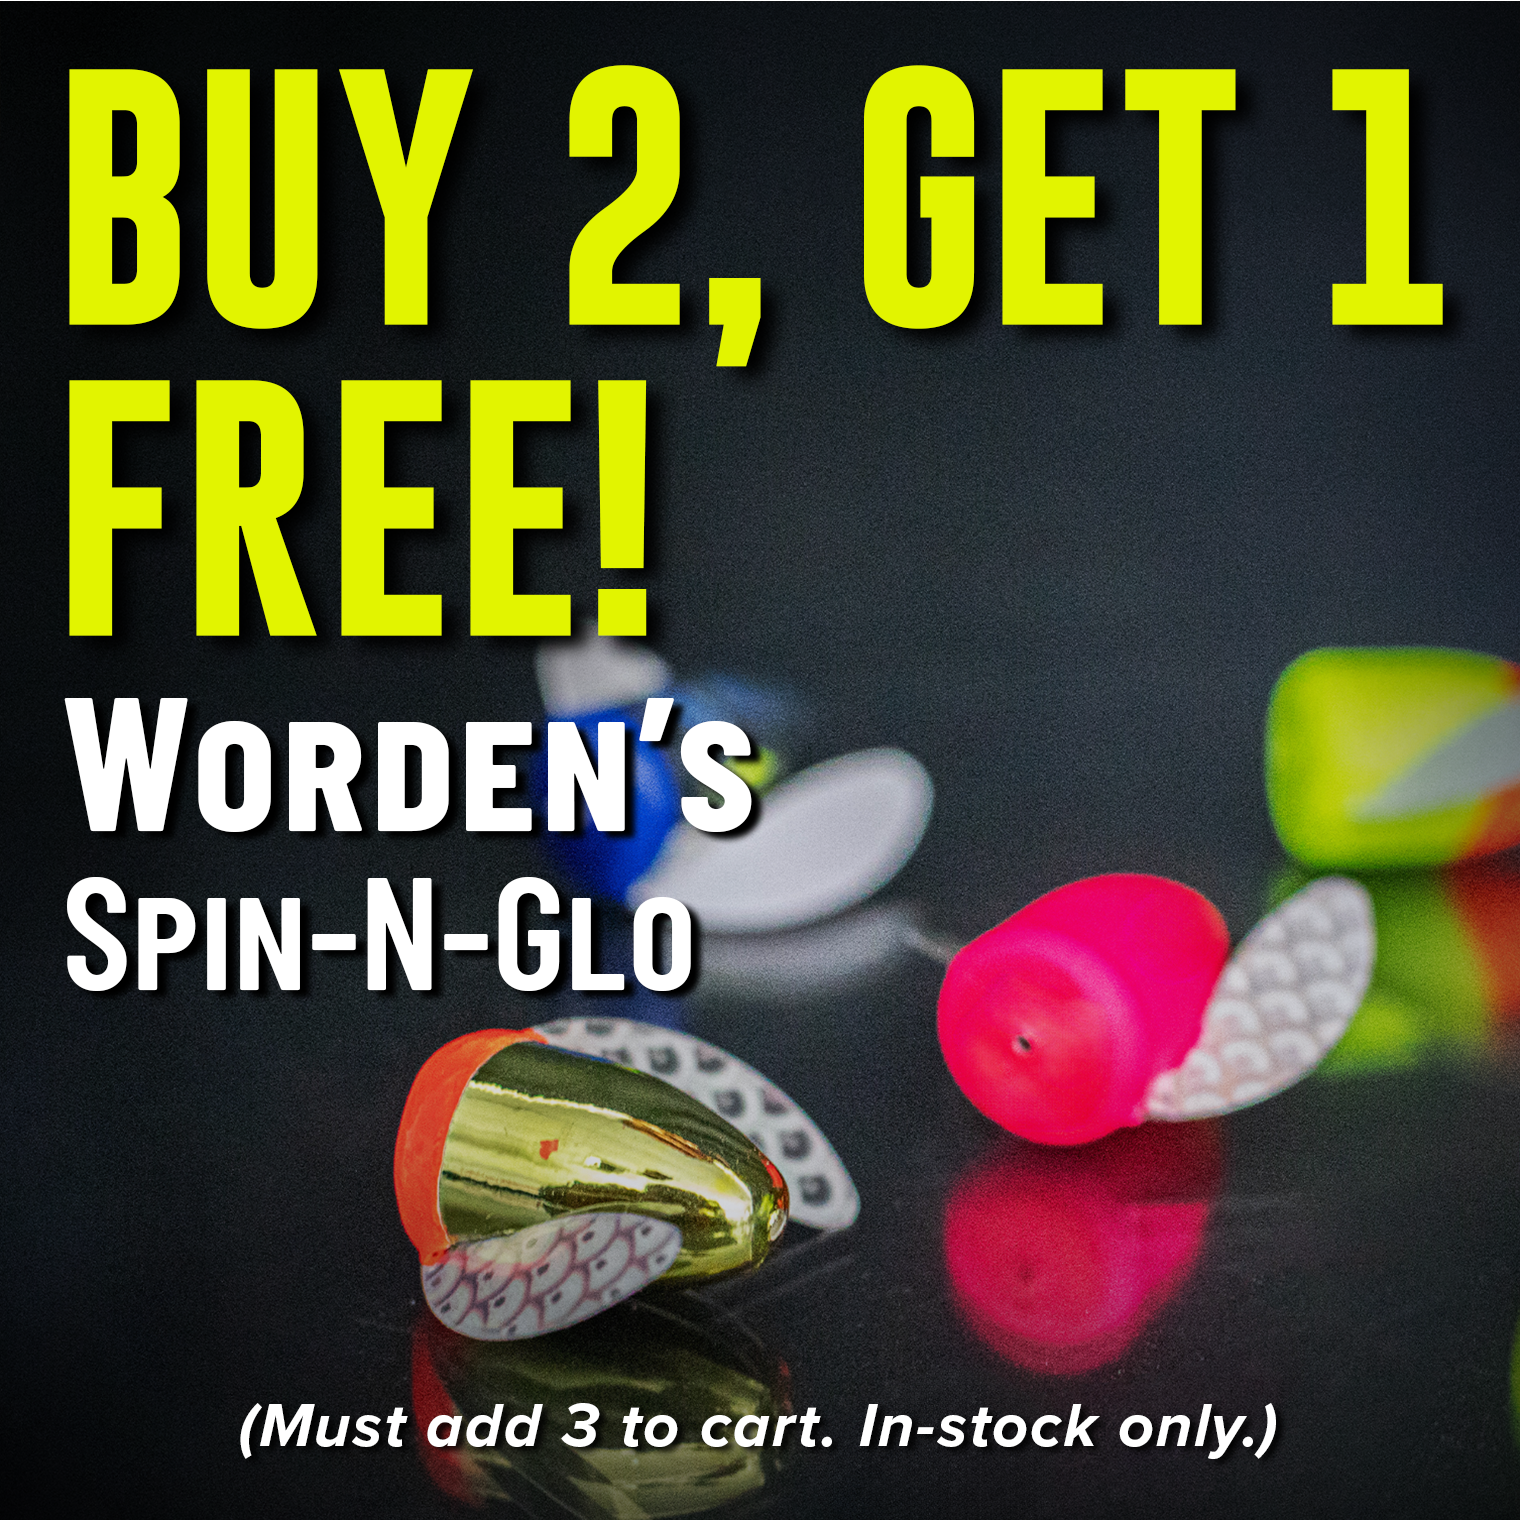 Buy 2, Get 1 Free! Worden's Spin-N-Glo (Must add 3 to cart. In-stock only.)